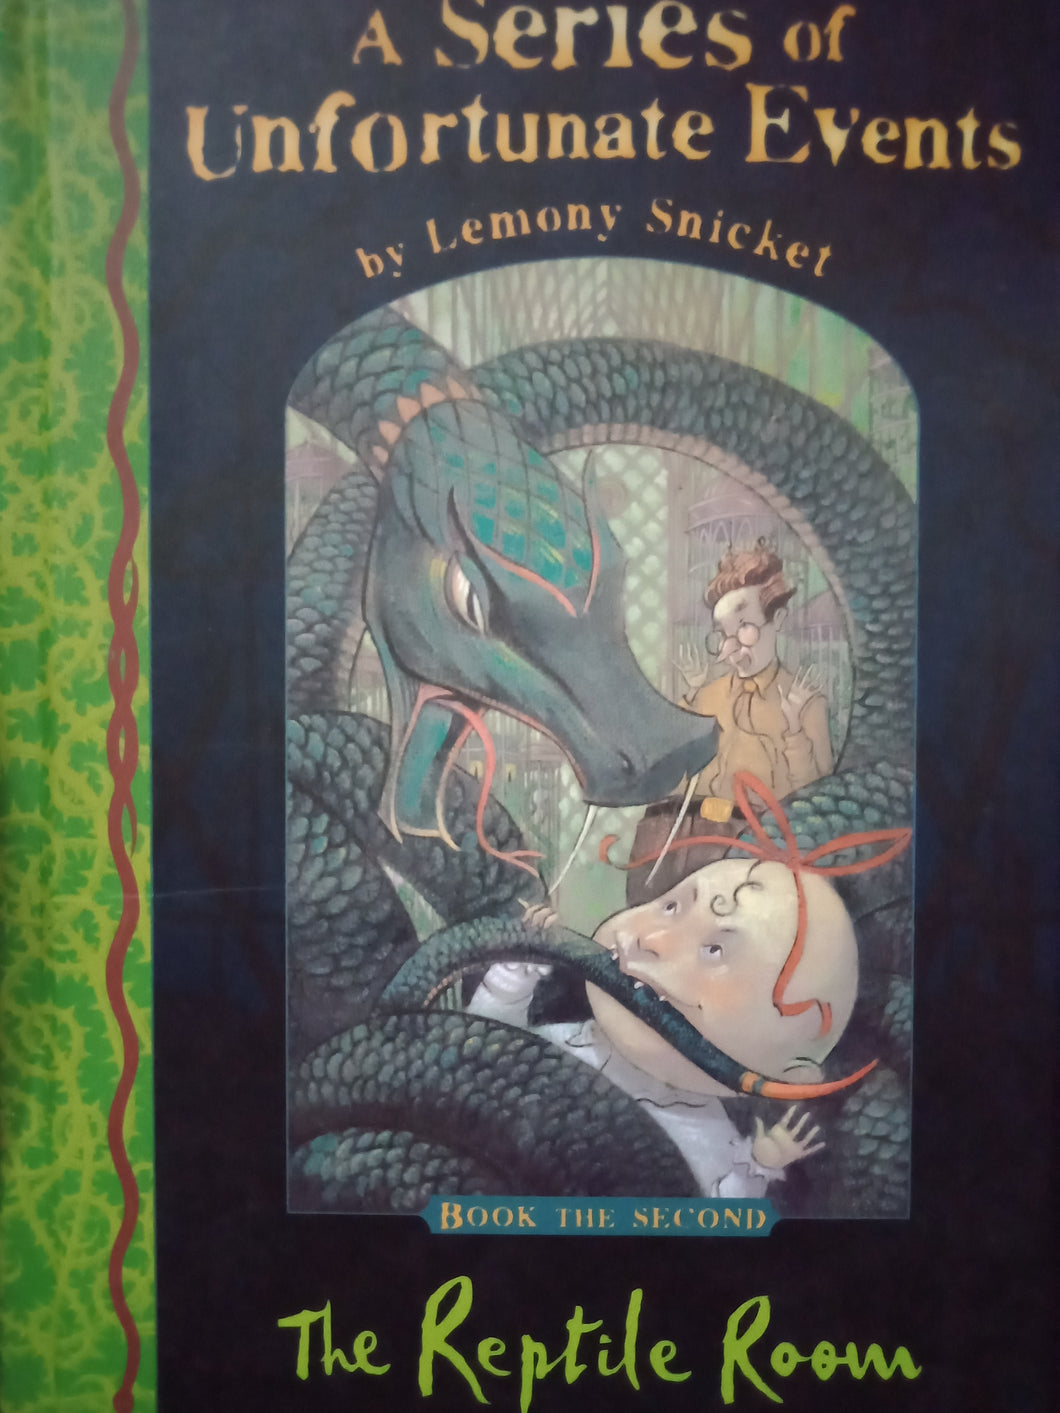 A Series Of Unfortunate Events: The Reptile Room by Lemony Snicket